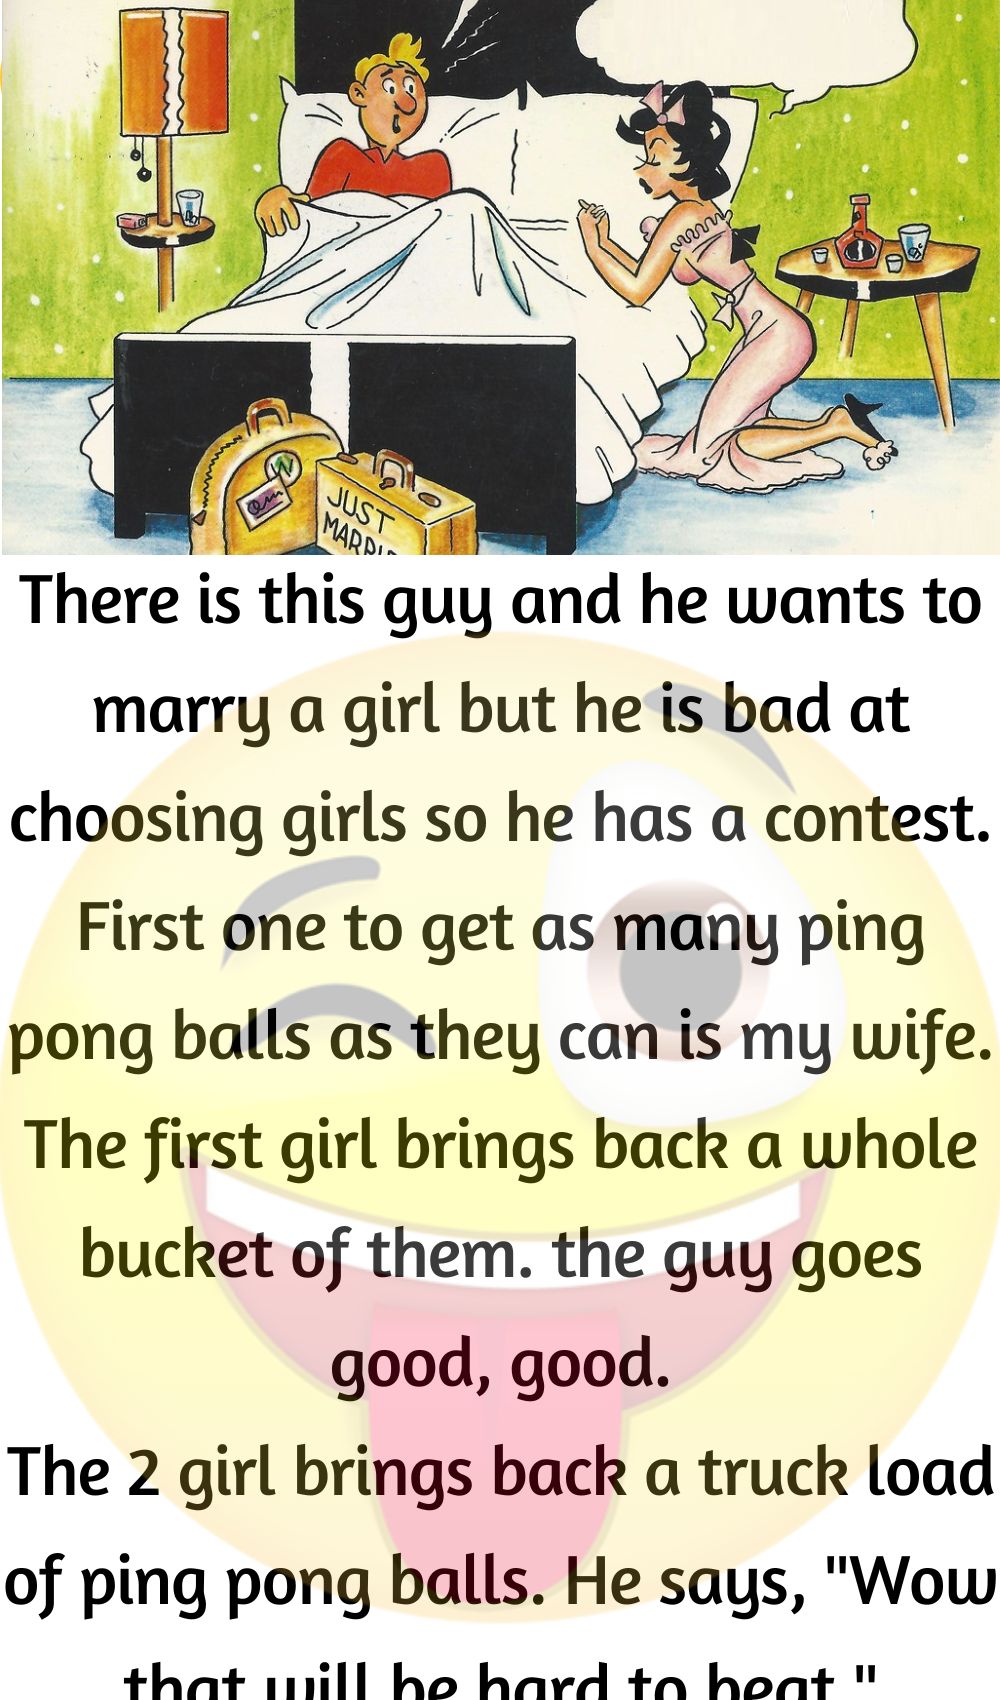 He wants to marry a girl